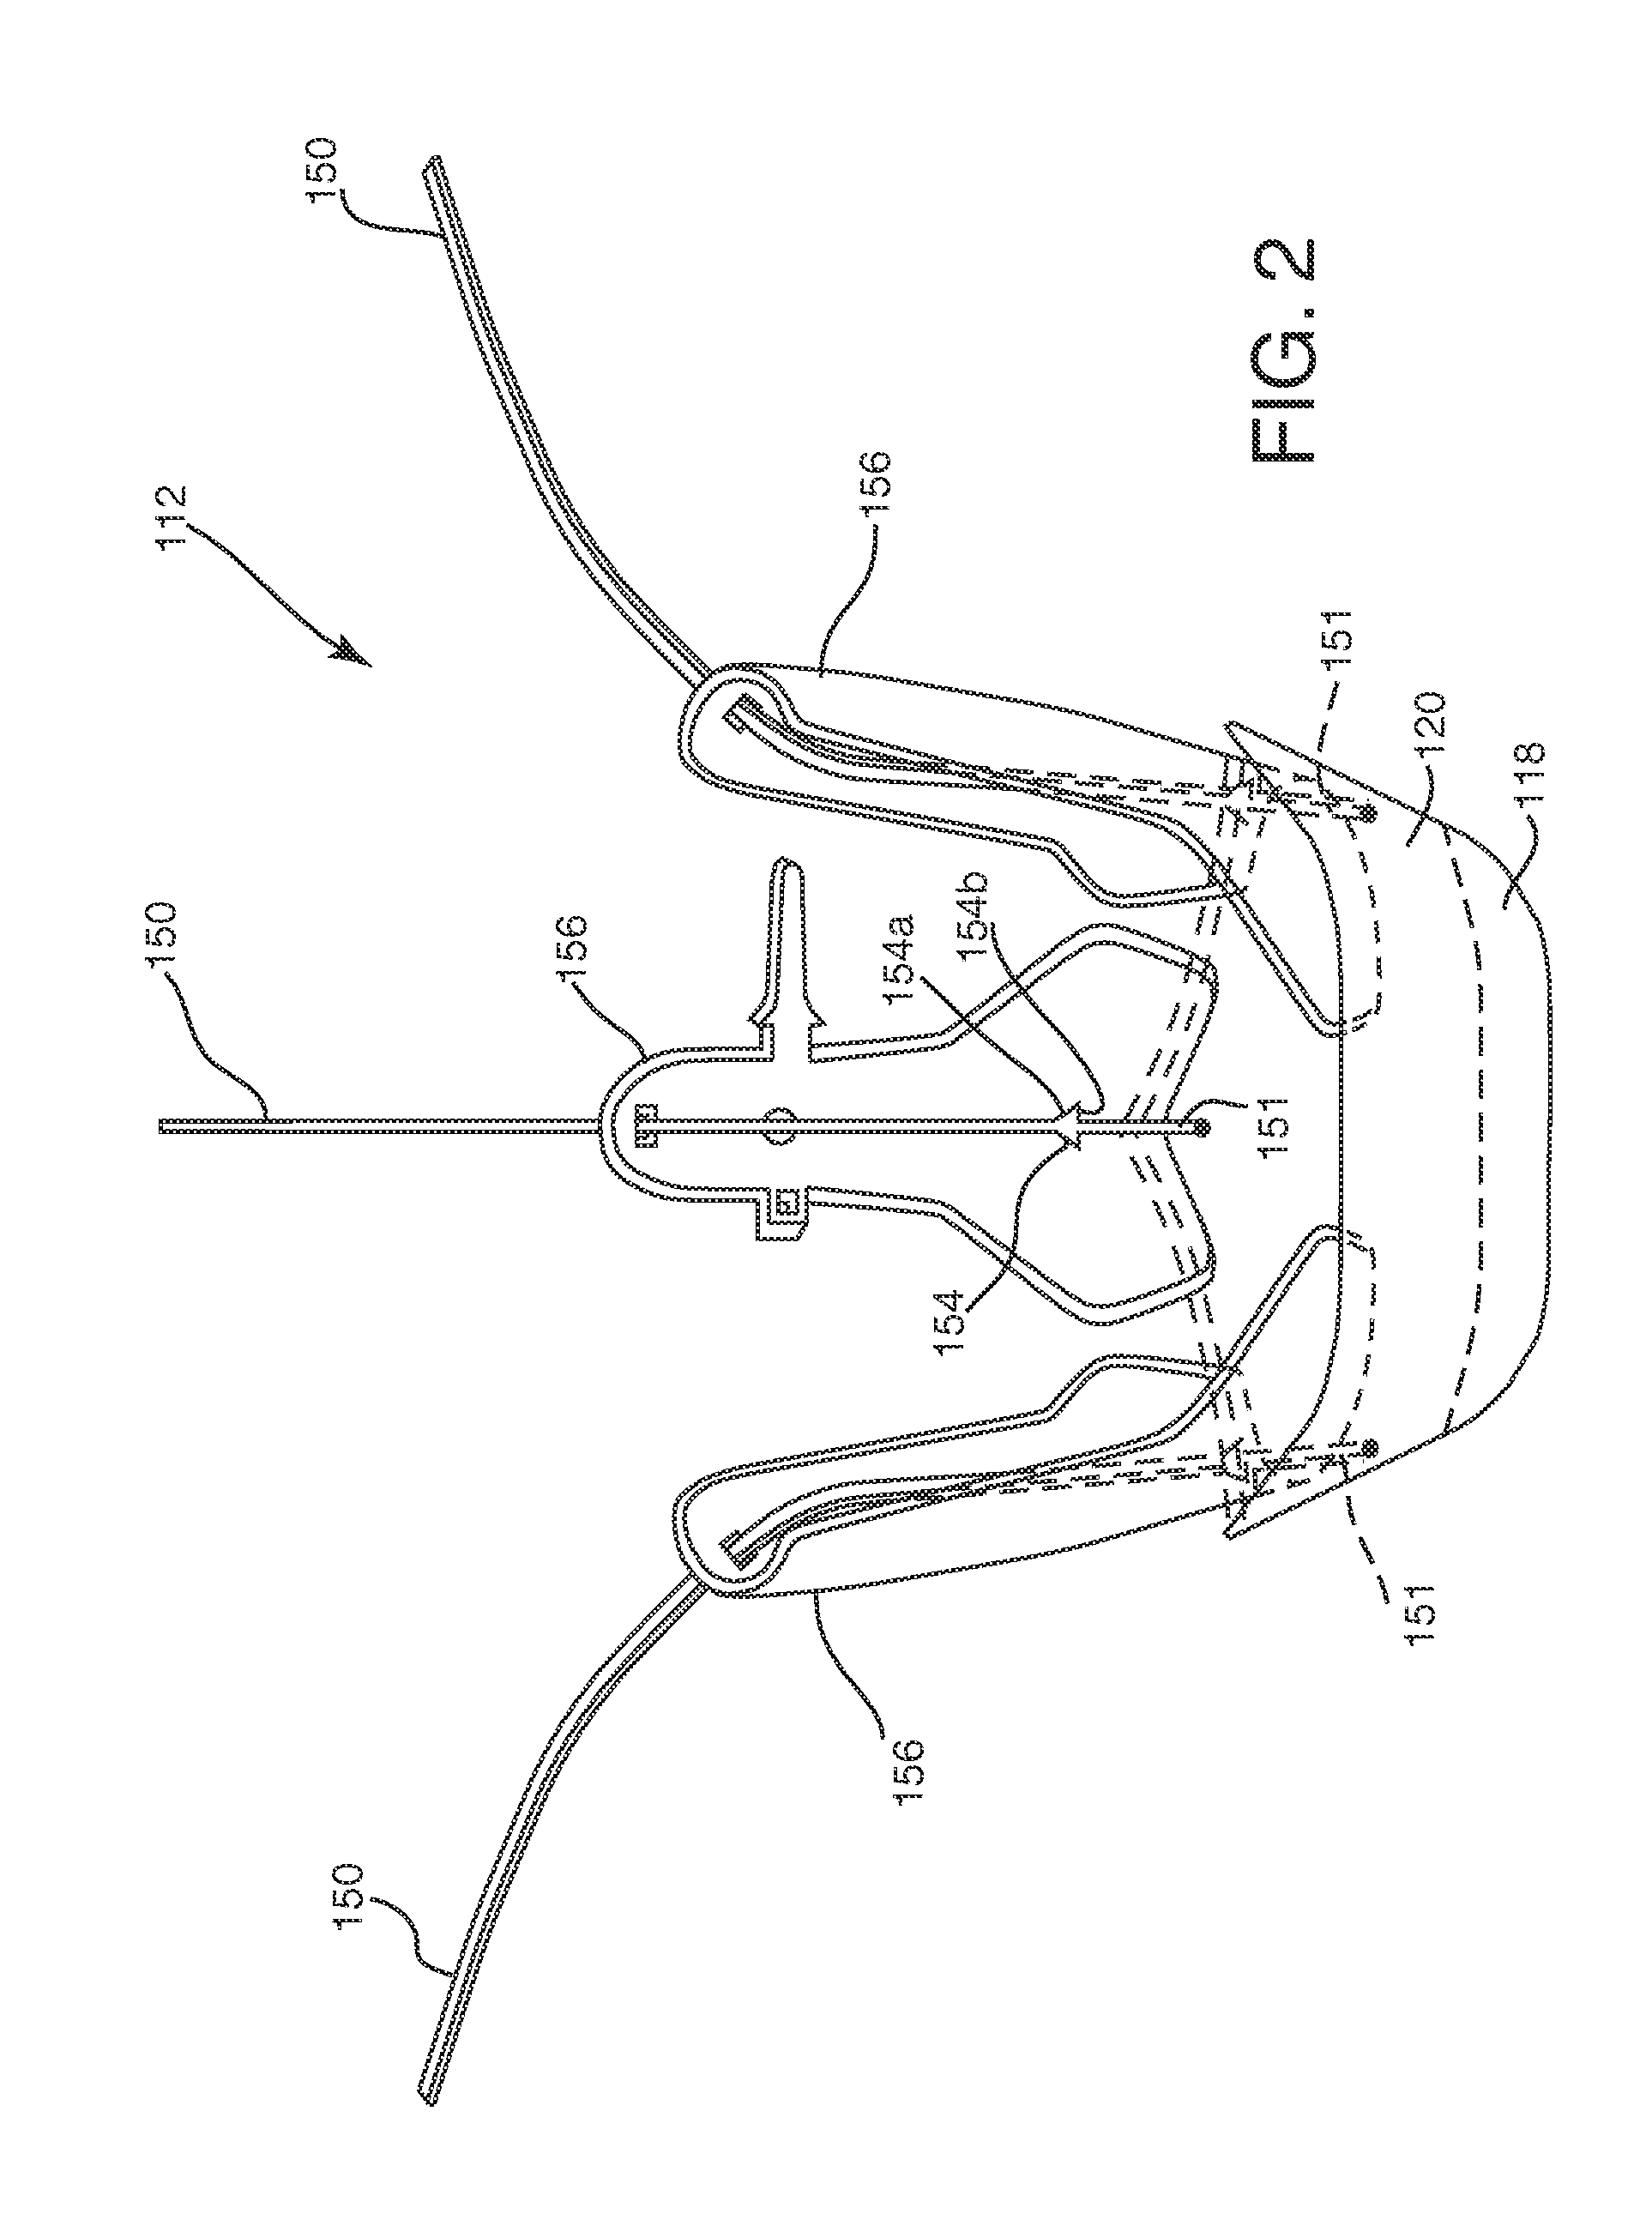 Guide shields for multiple component prosthetic heart valve assemblies and apparatus and methods for using them